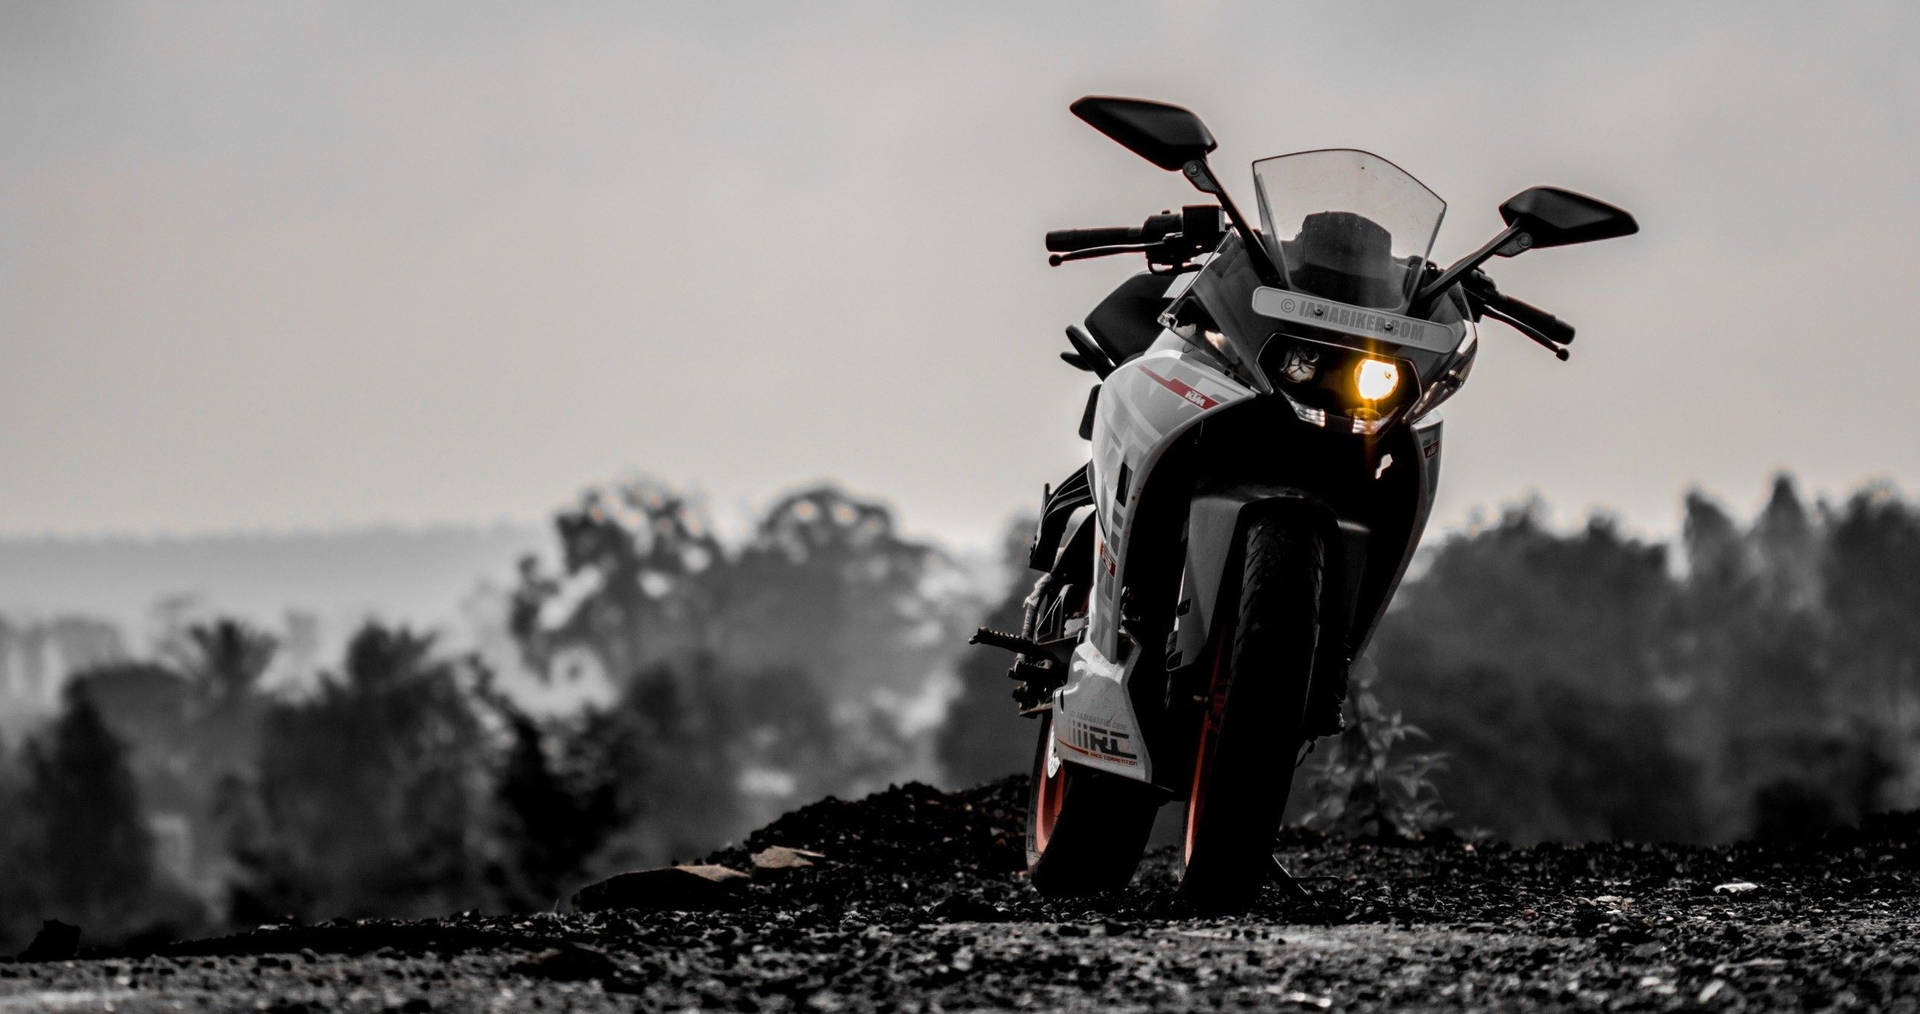 Free Ktm Rc 390 Wallpaper Downloads, [100+] Ktm Rc 390 Wallpapers for FREE  